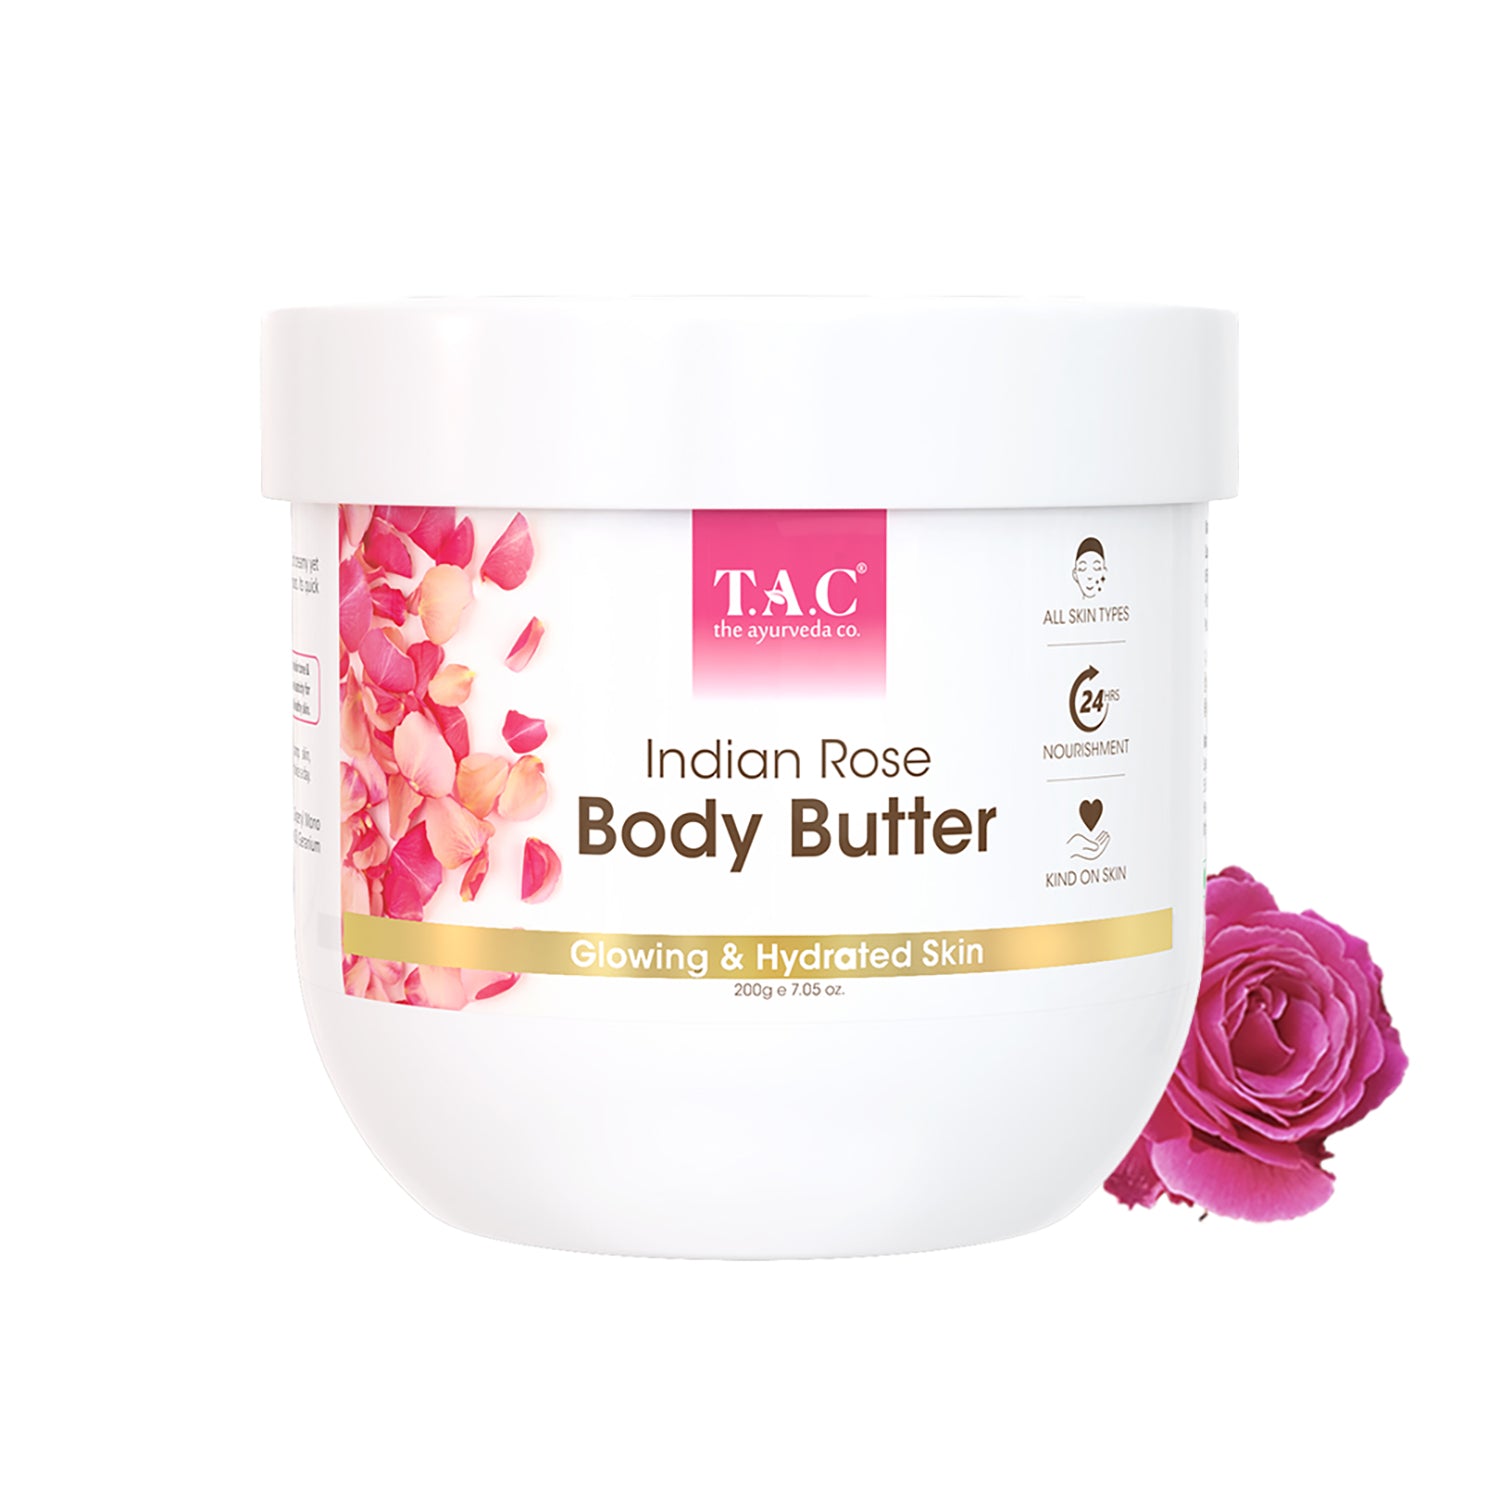 Indian Rose Body Butter